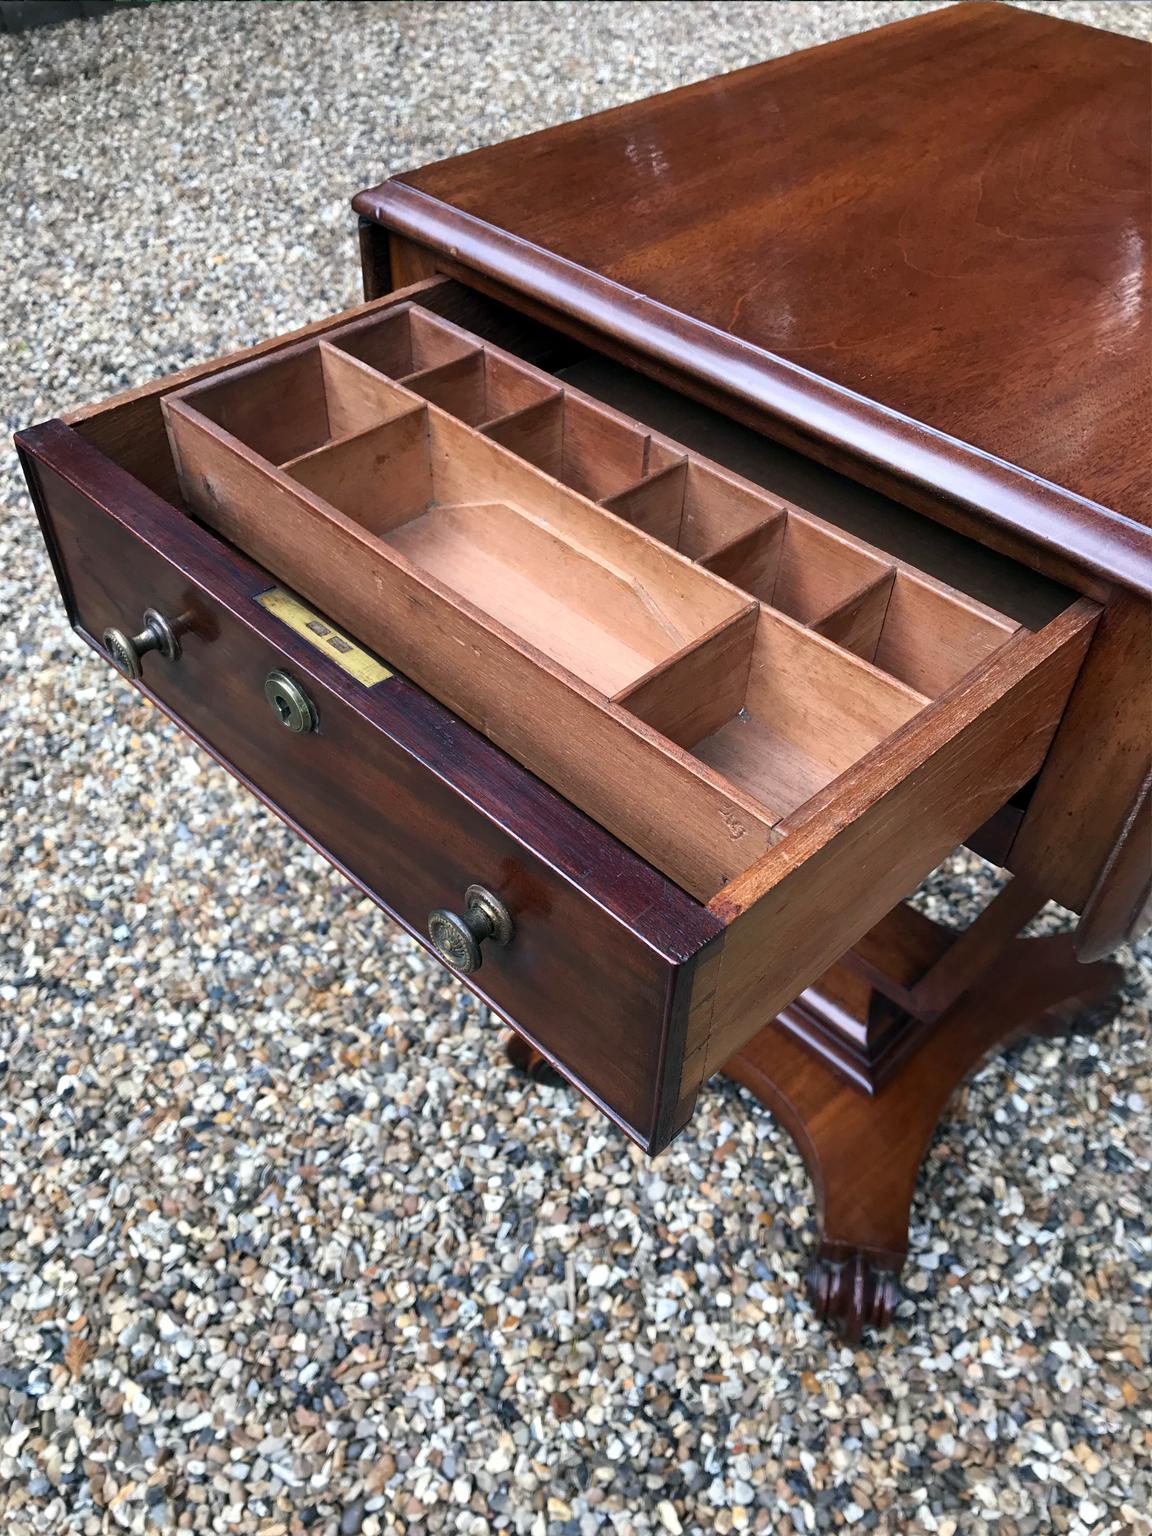 William IV Mahogany Drop-Leaf Work Table In Good Condition In Richmond, London, Surrey